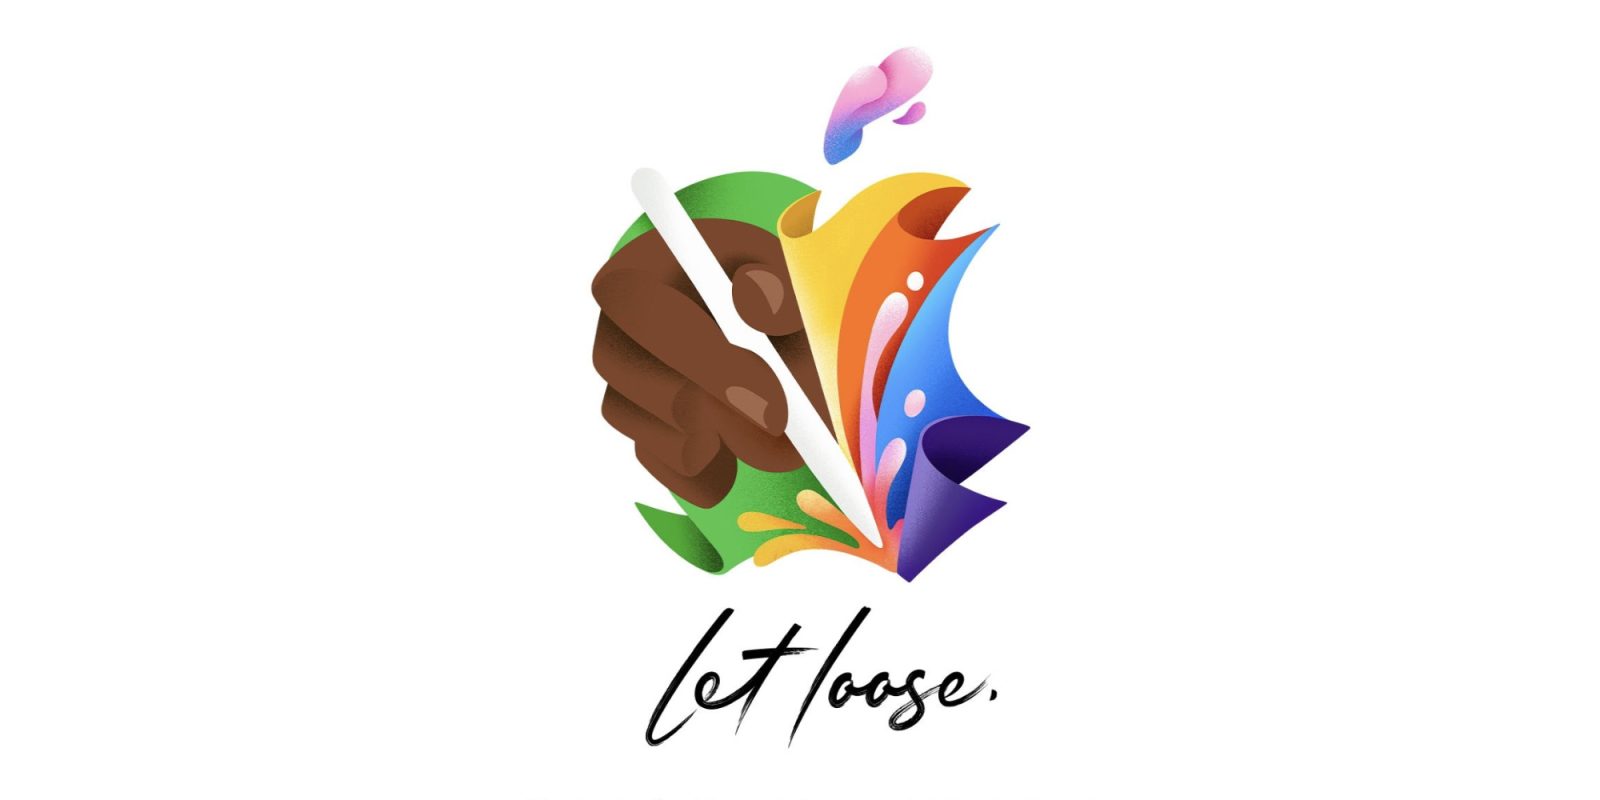 photo of Apple announces special event for May 7: ‘Let Loose’ image